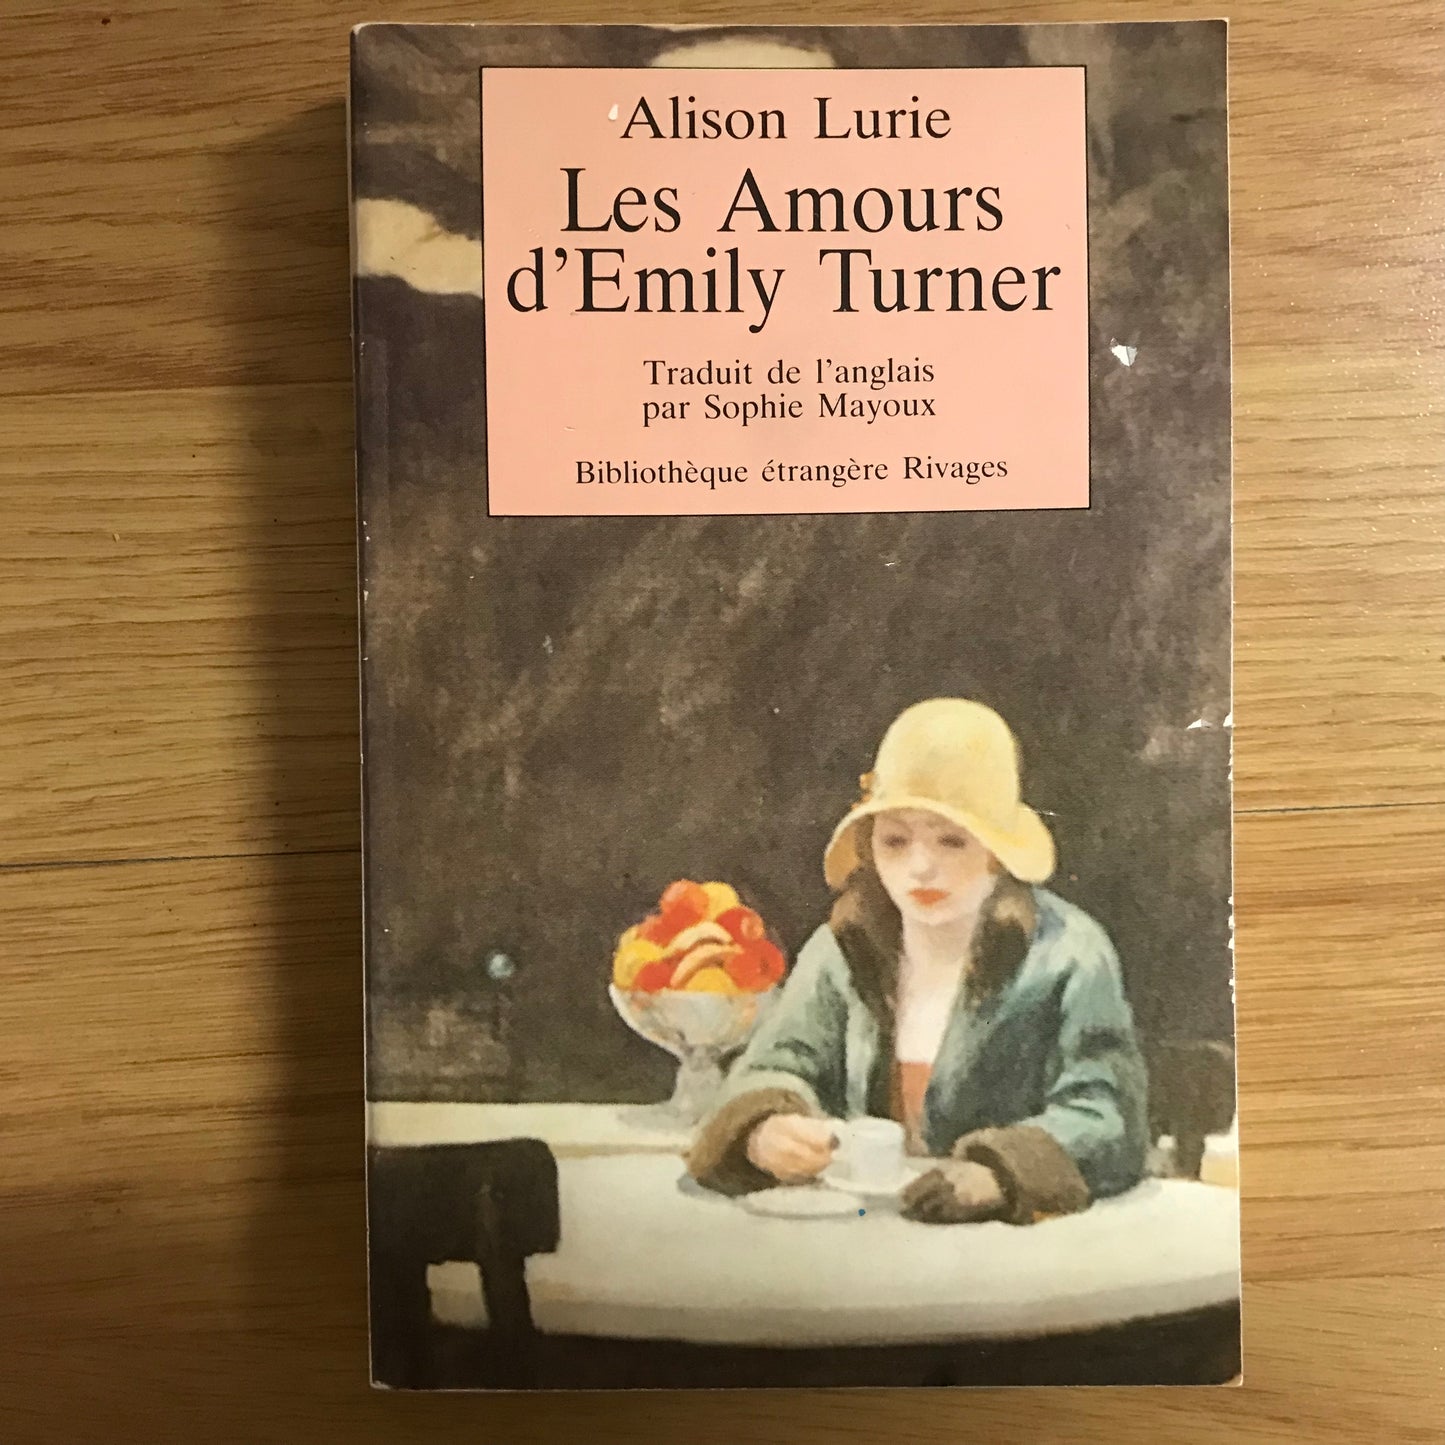 Lurie, Alison - Les amours d’Emily Turner